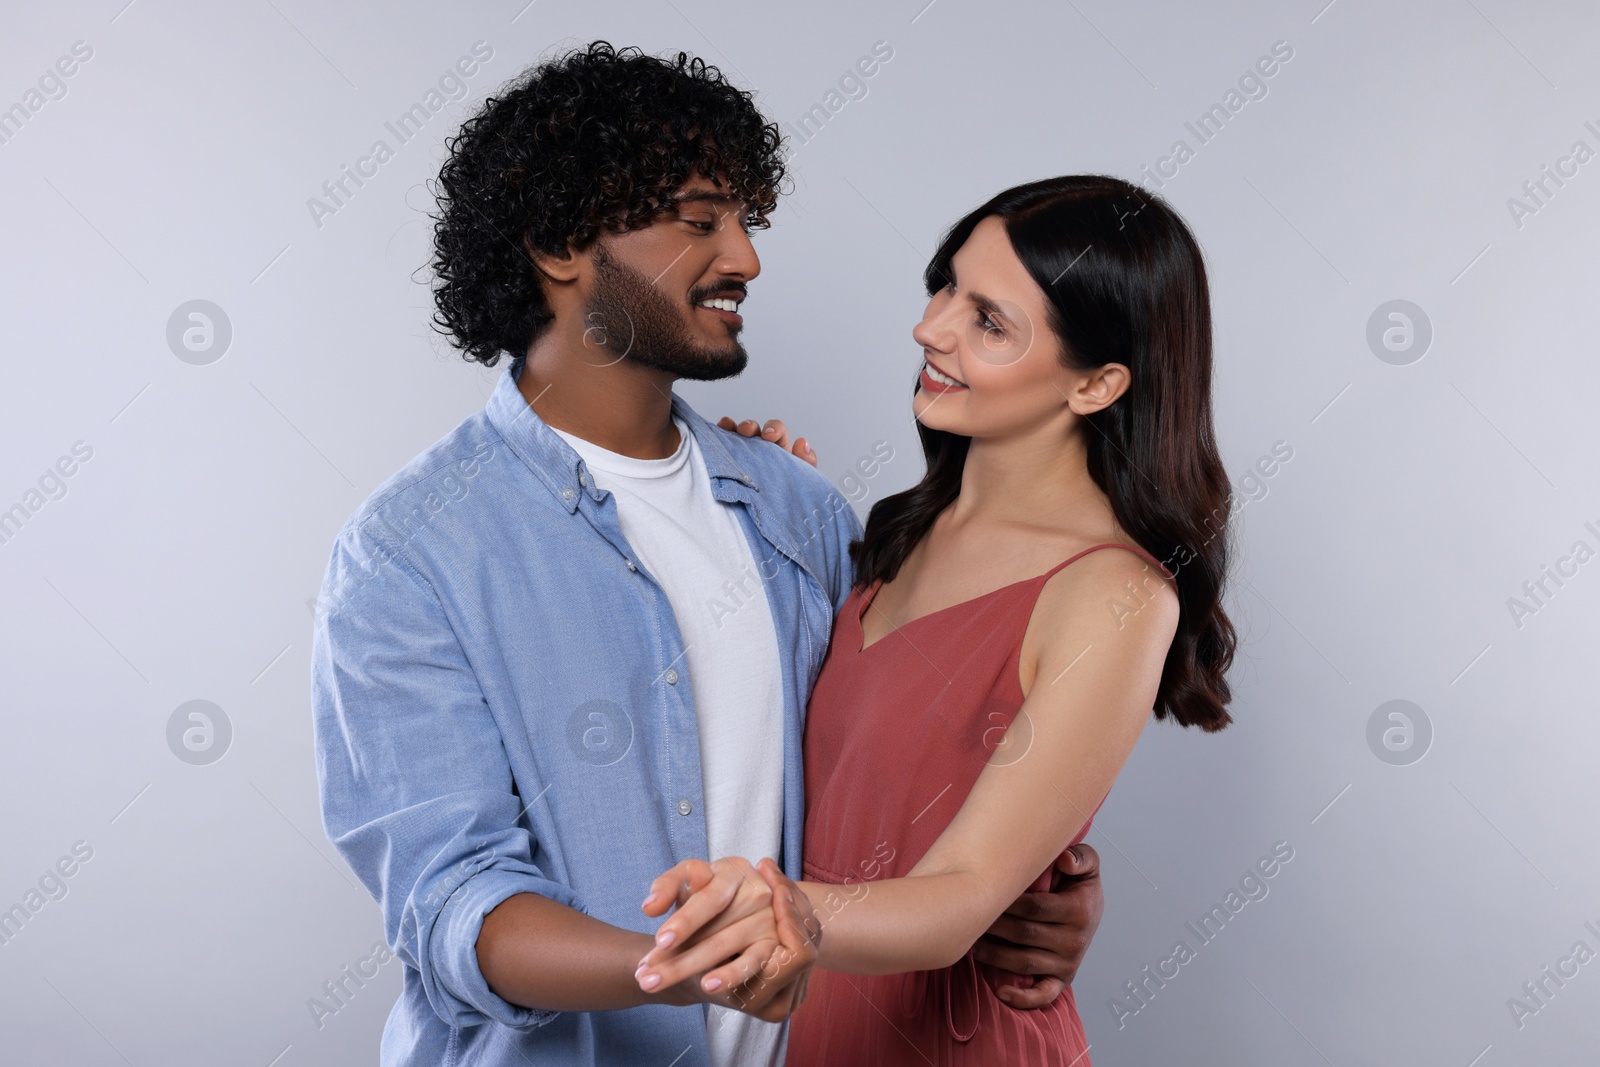 Photo of International dating. Happy couple dancing on light grey background